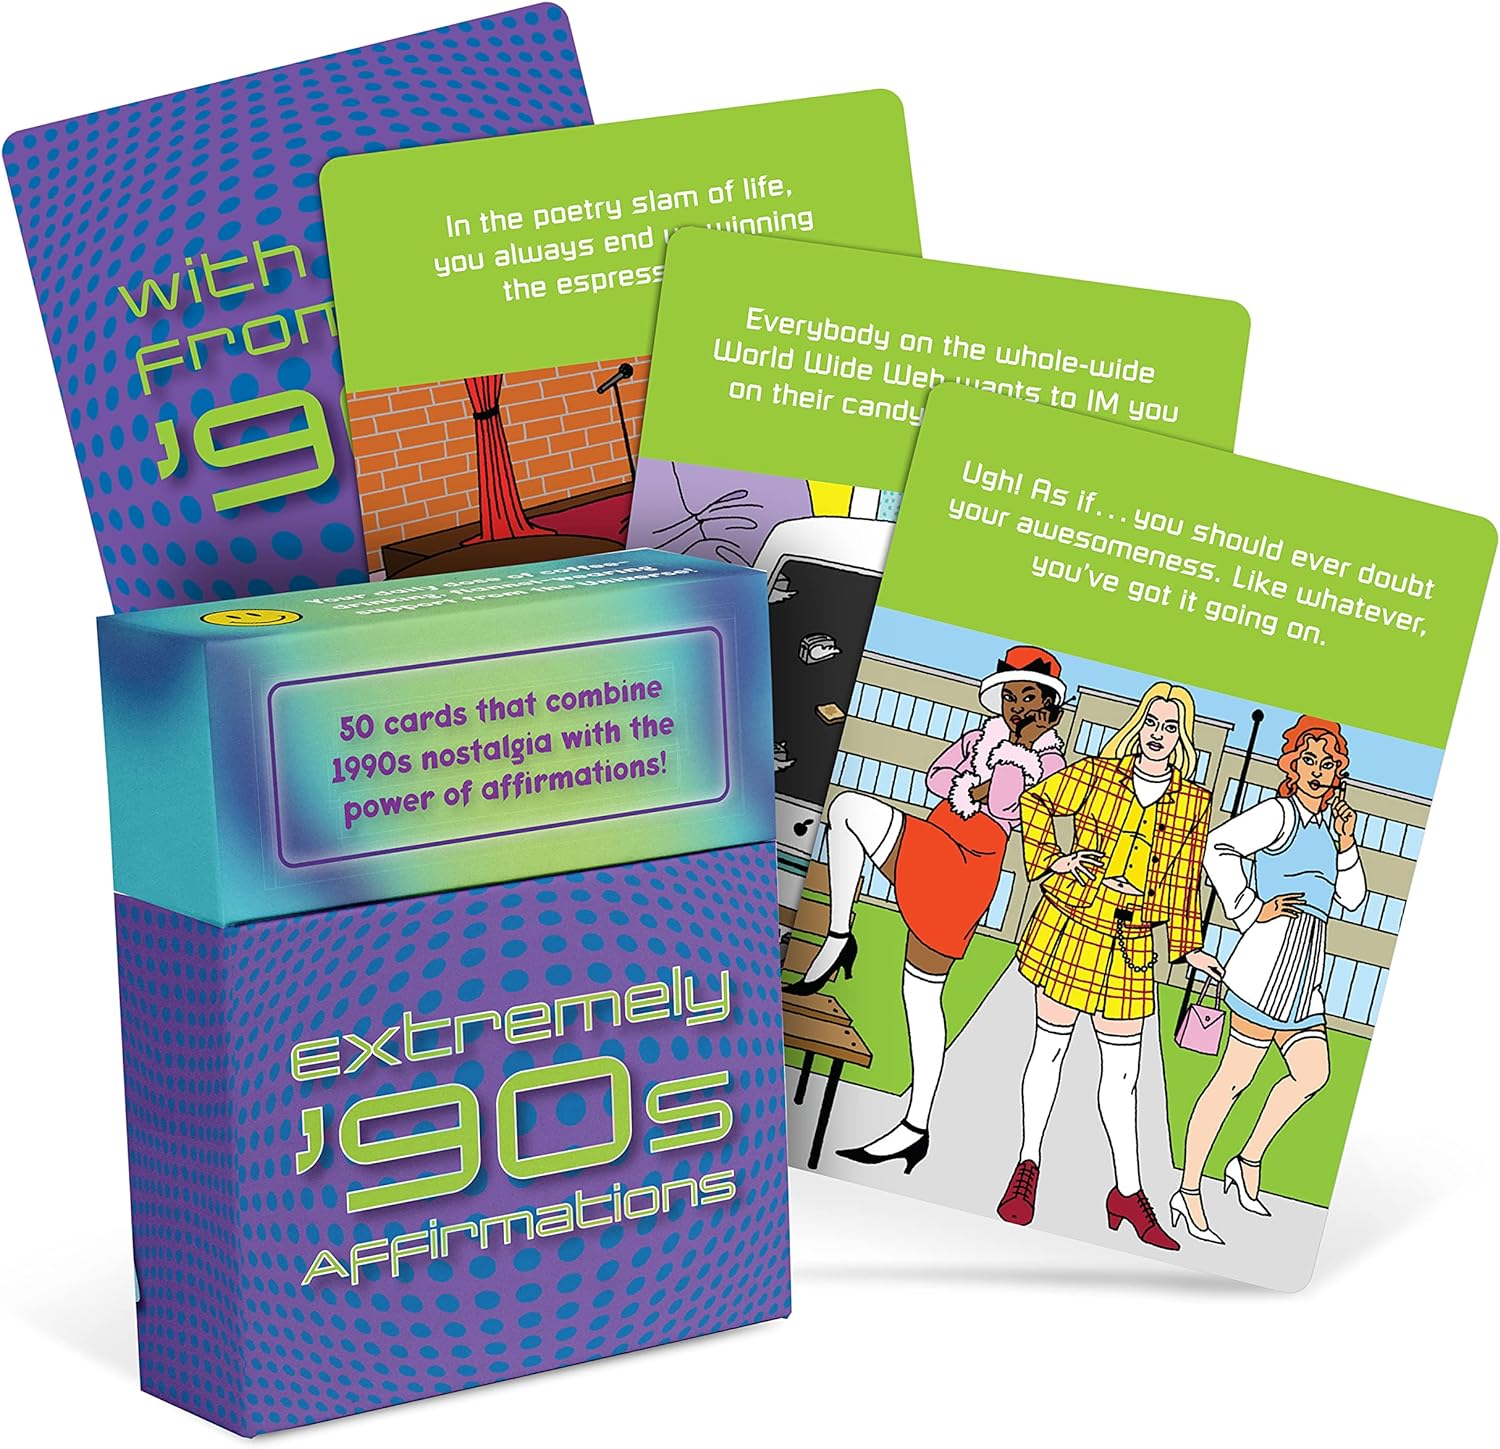 Knock Knock Extremely 90s Affirmations Deck: 50 Cards That Combine 1990s Nostalgia With The Power of Affirmations! (Affirmations from the Decades)